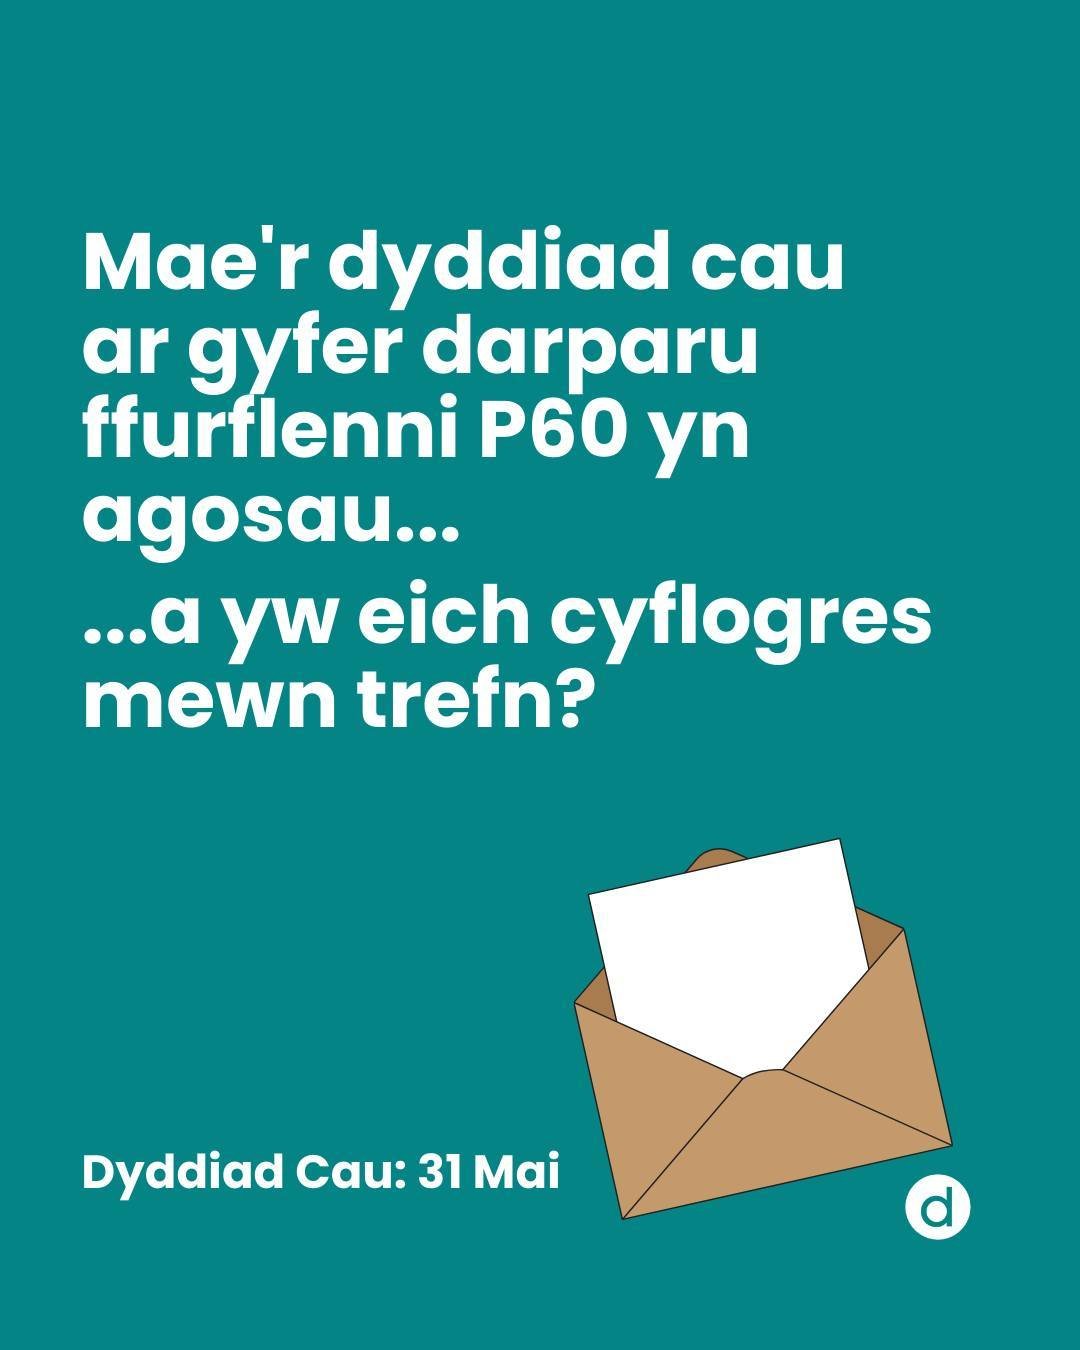 The deadline for providing your employees with their P60s is coming up [31st May] - is your payroll management in line? // Mae&rsquo;r dyddiad cau ar gyfer darparu P60s i&rsquo;ch cyflogeion yn dod i fyny [31 Mai]...